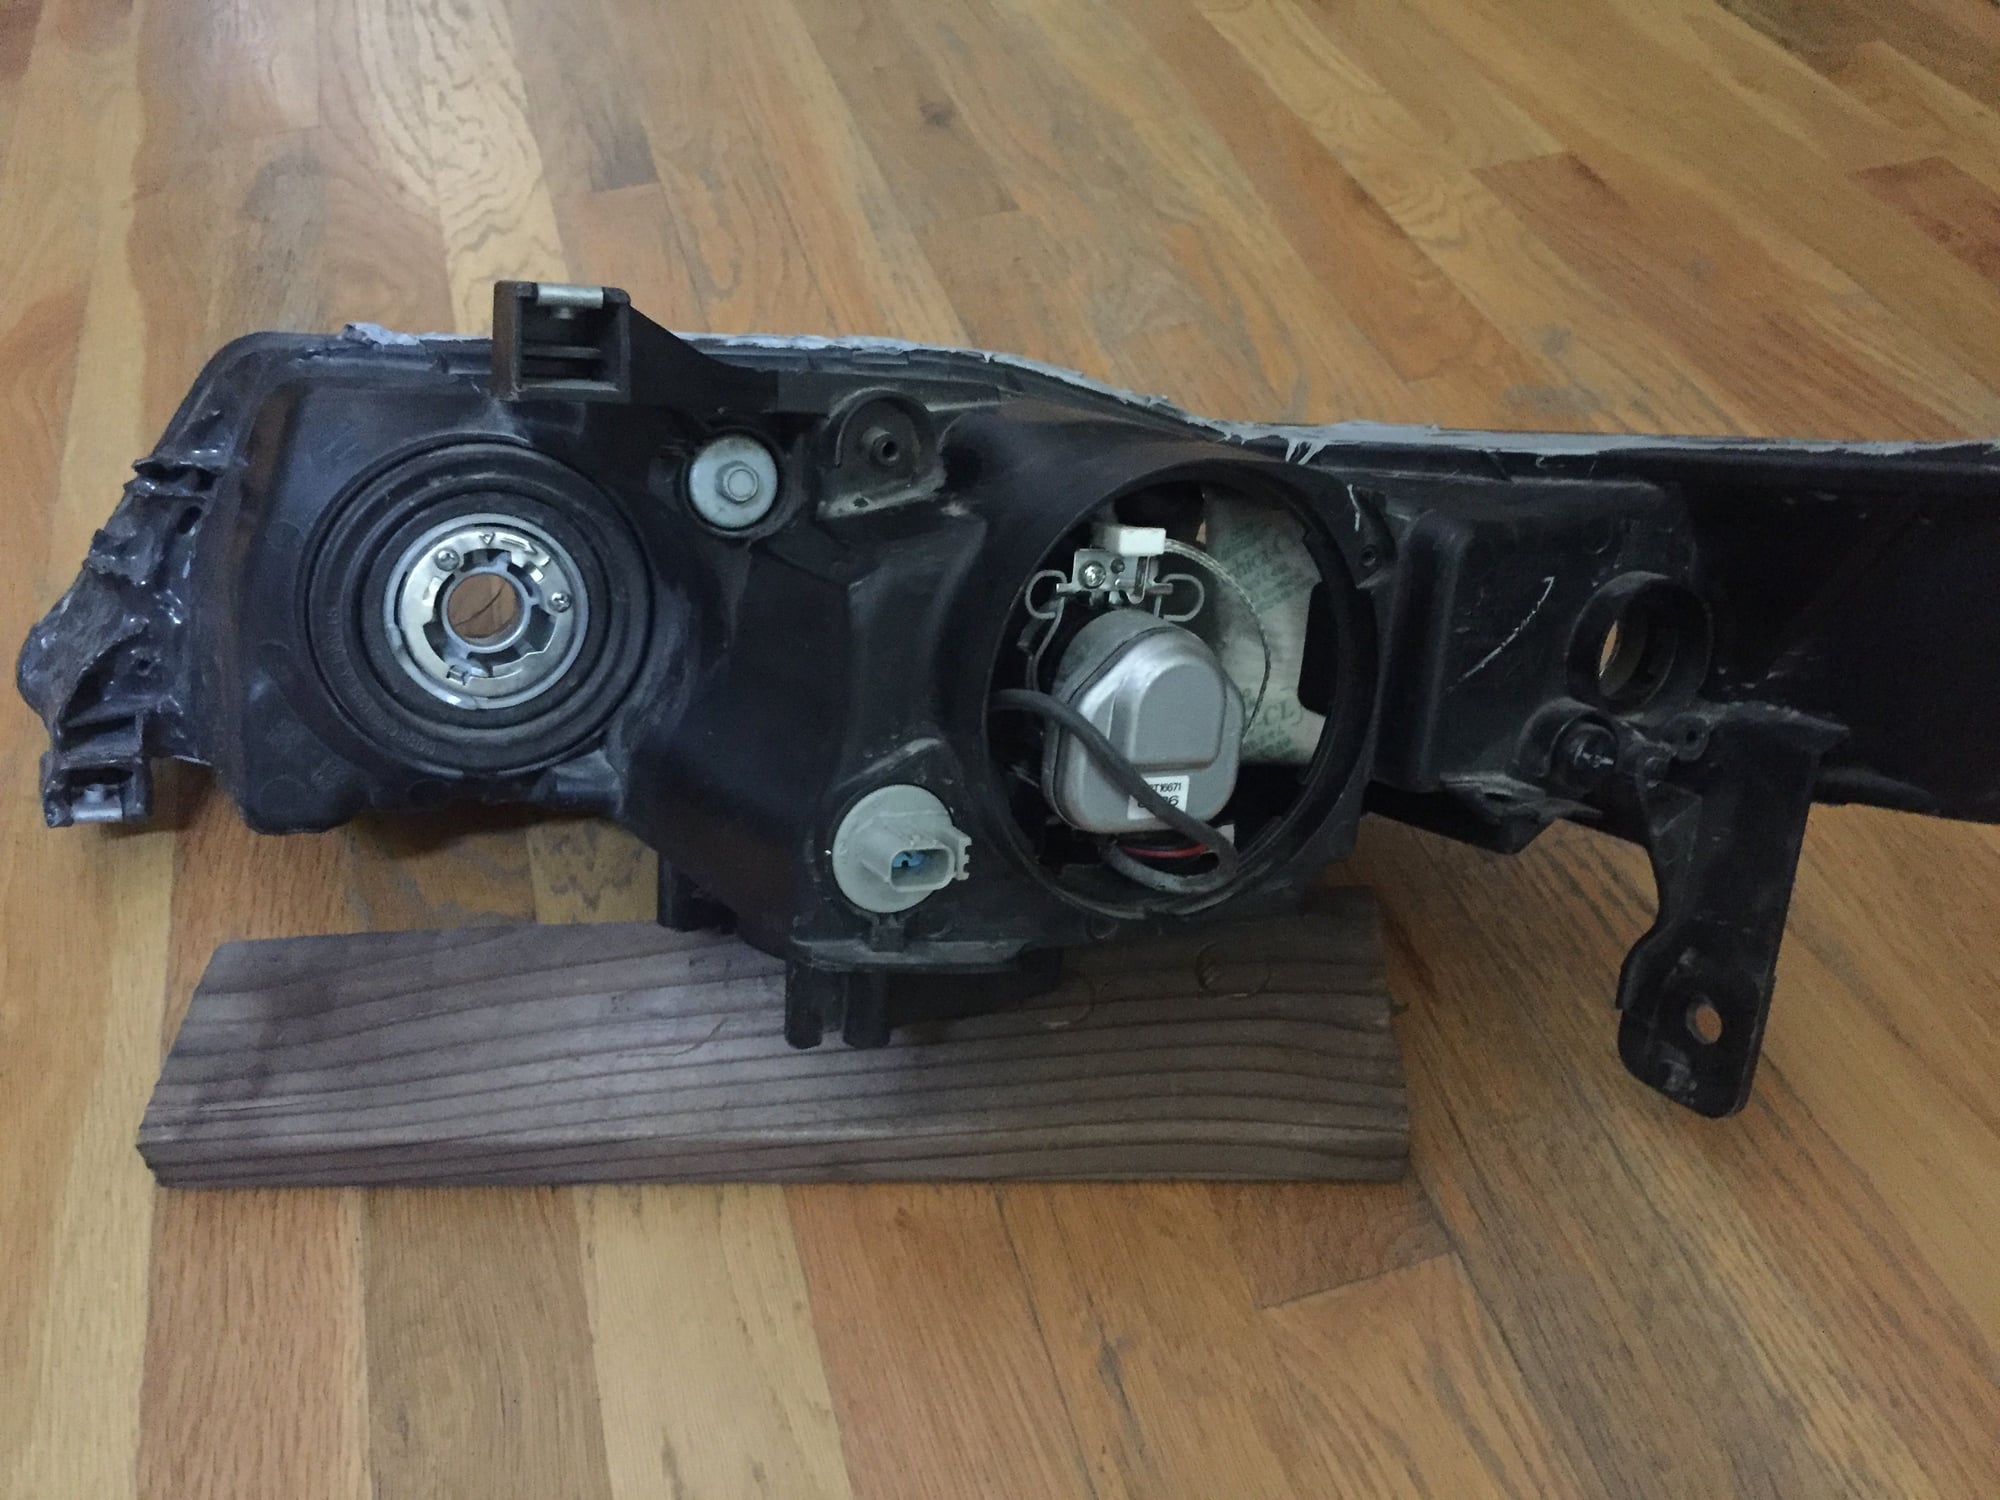 Lights - FS: Acura TL-S Headlights - 3rd Gen, 2004-2008 - Used - 2004 to 2008 Acura TL - Denver, CO 80209, United States